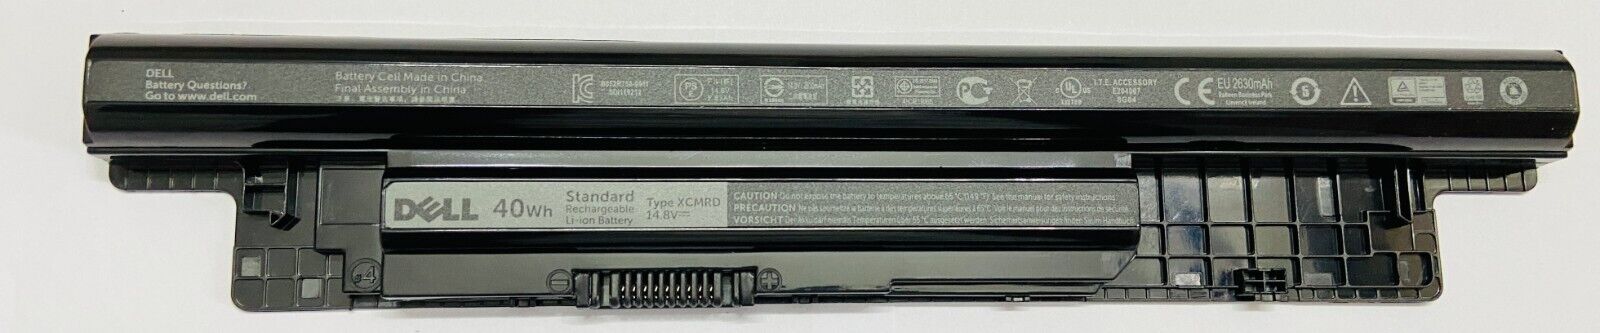 Genuine xcmrd battery for dell-Inspiron 15 3000 Series 3542 3543 3521 3537 3531